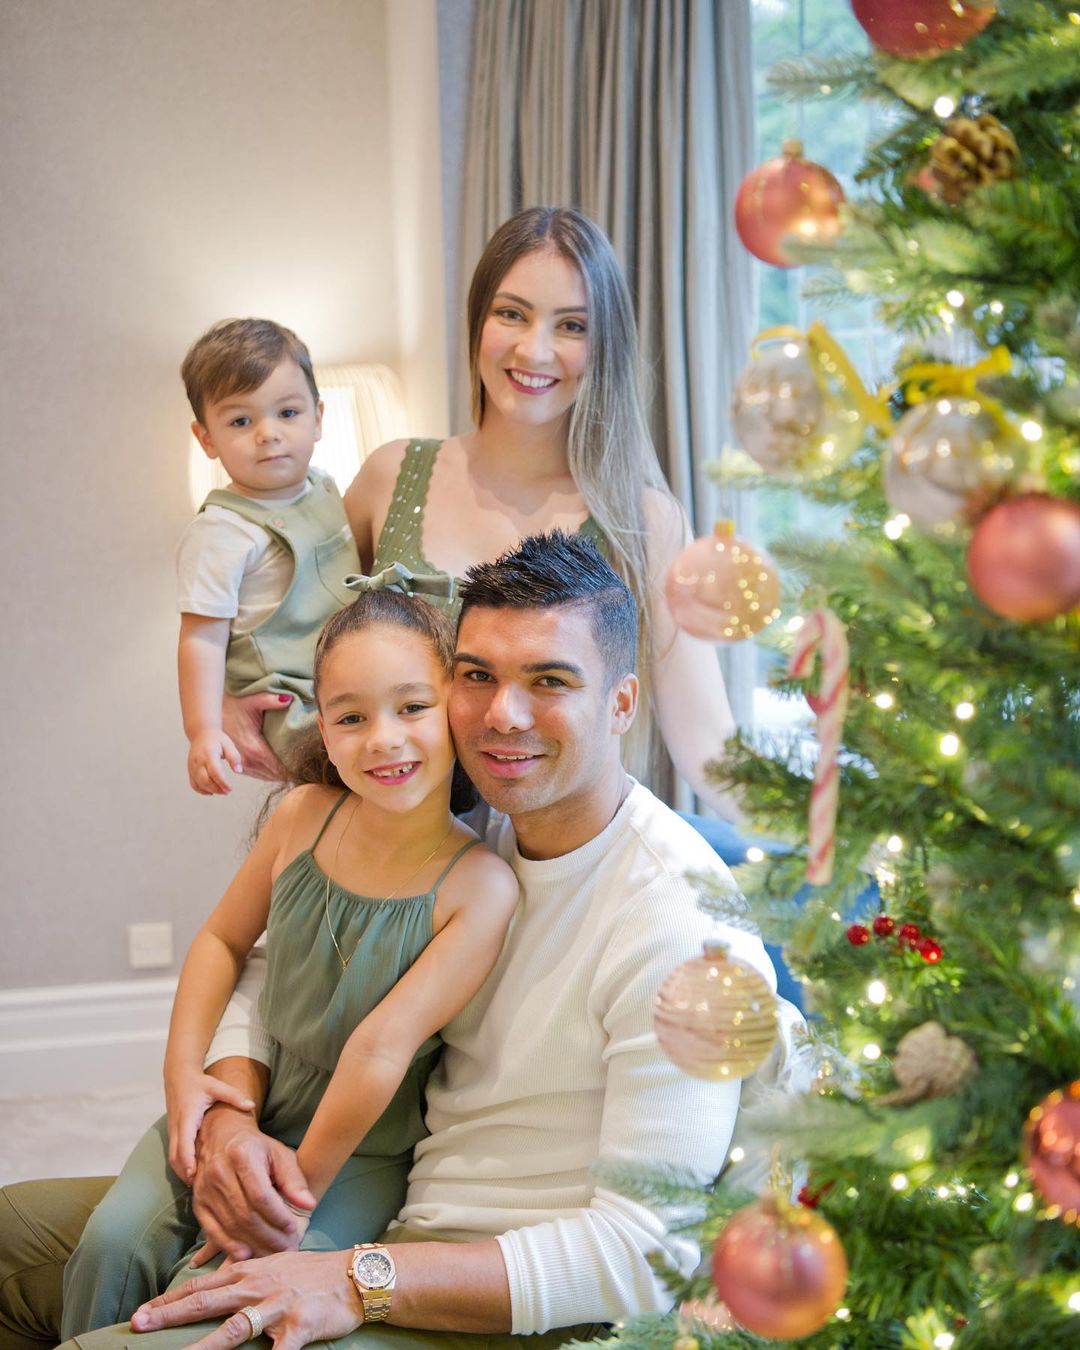 Casemiro is married to his wife, Anna, with two children.